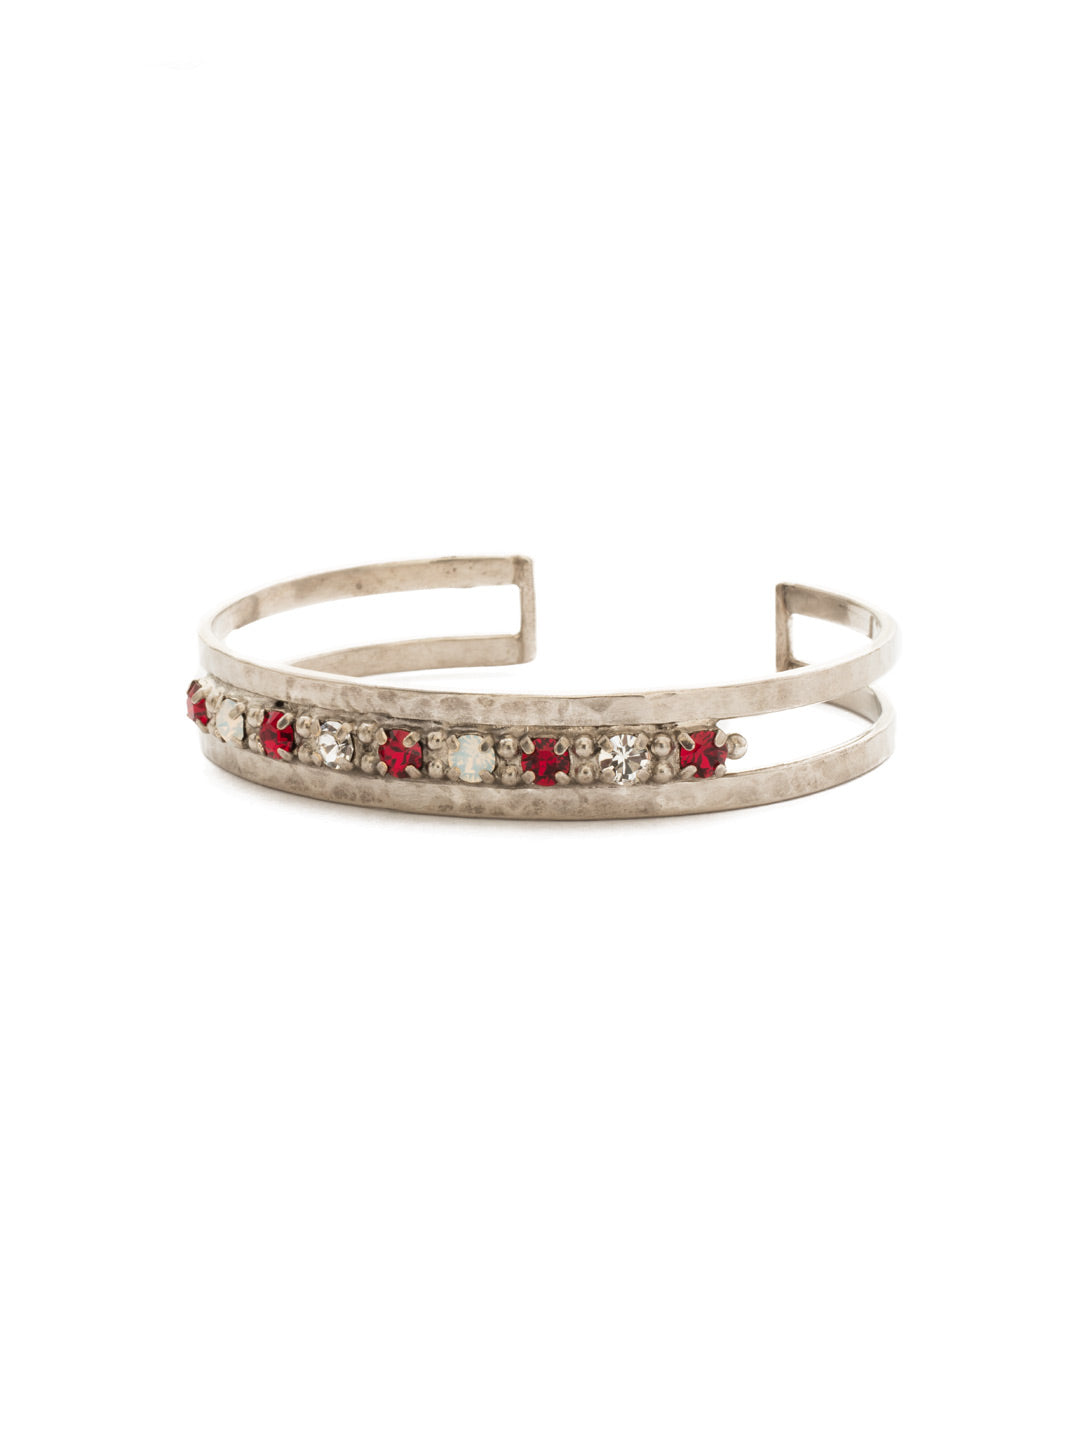 Hammered Metal and Crystal Cuff - BDU49ASCP - <p>Stacking done for you! This unique cuff features a row of crystals set between two thin, hammered metal cuffs. From Sorrelli's Crimson Pride collection in our Antique Silver-tone finish.</p>